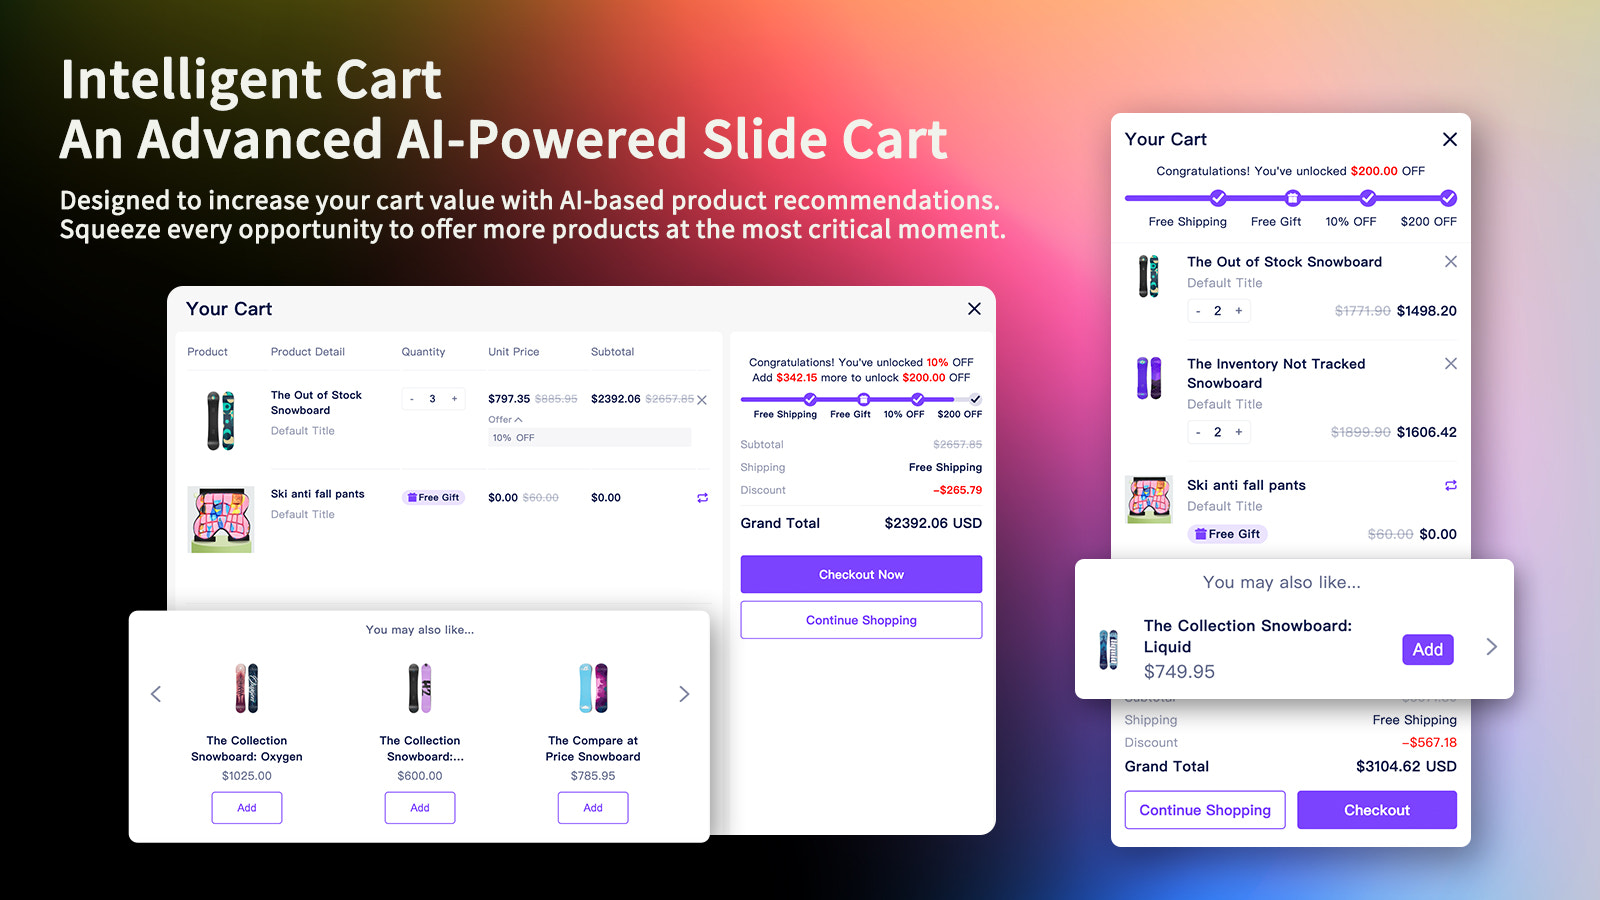 Increase your cart value with AI-based product recommendations